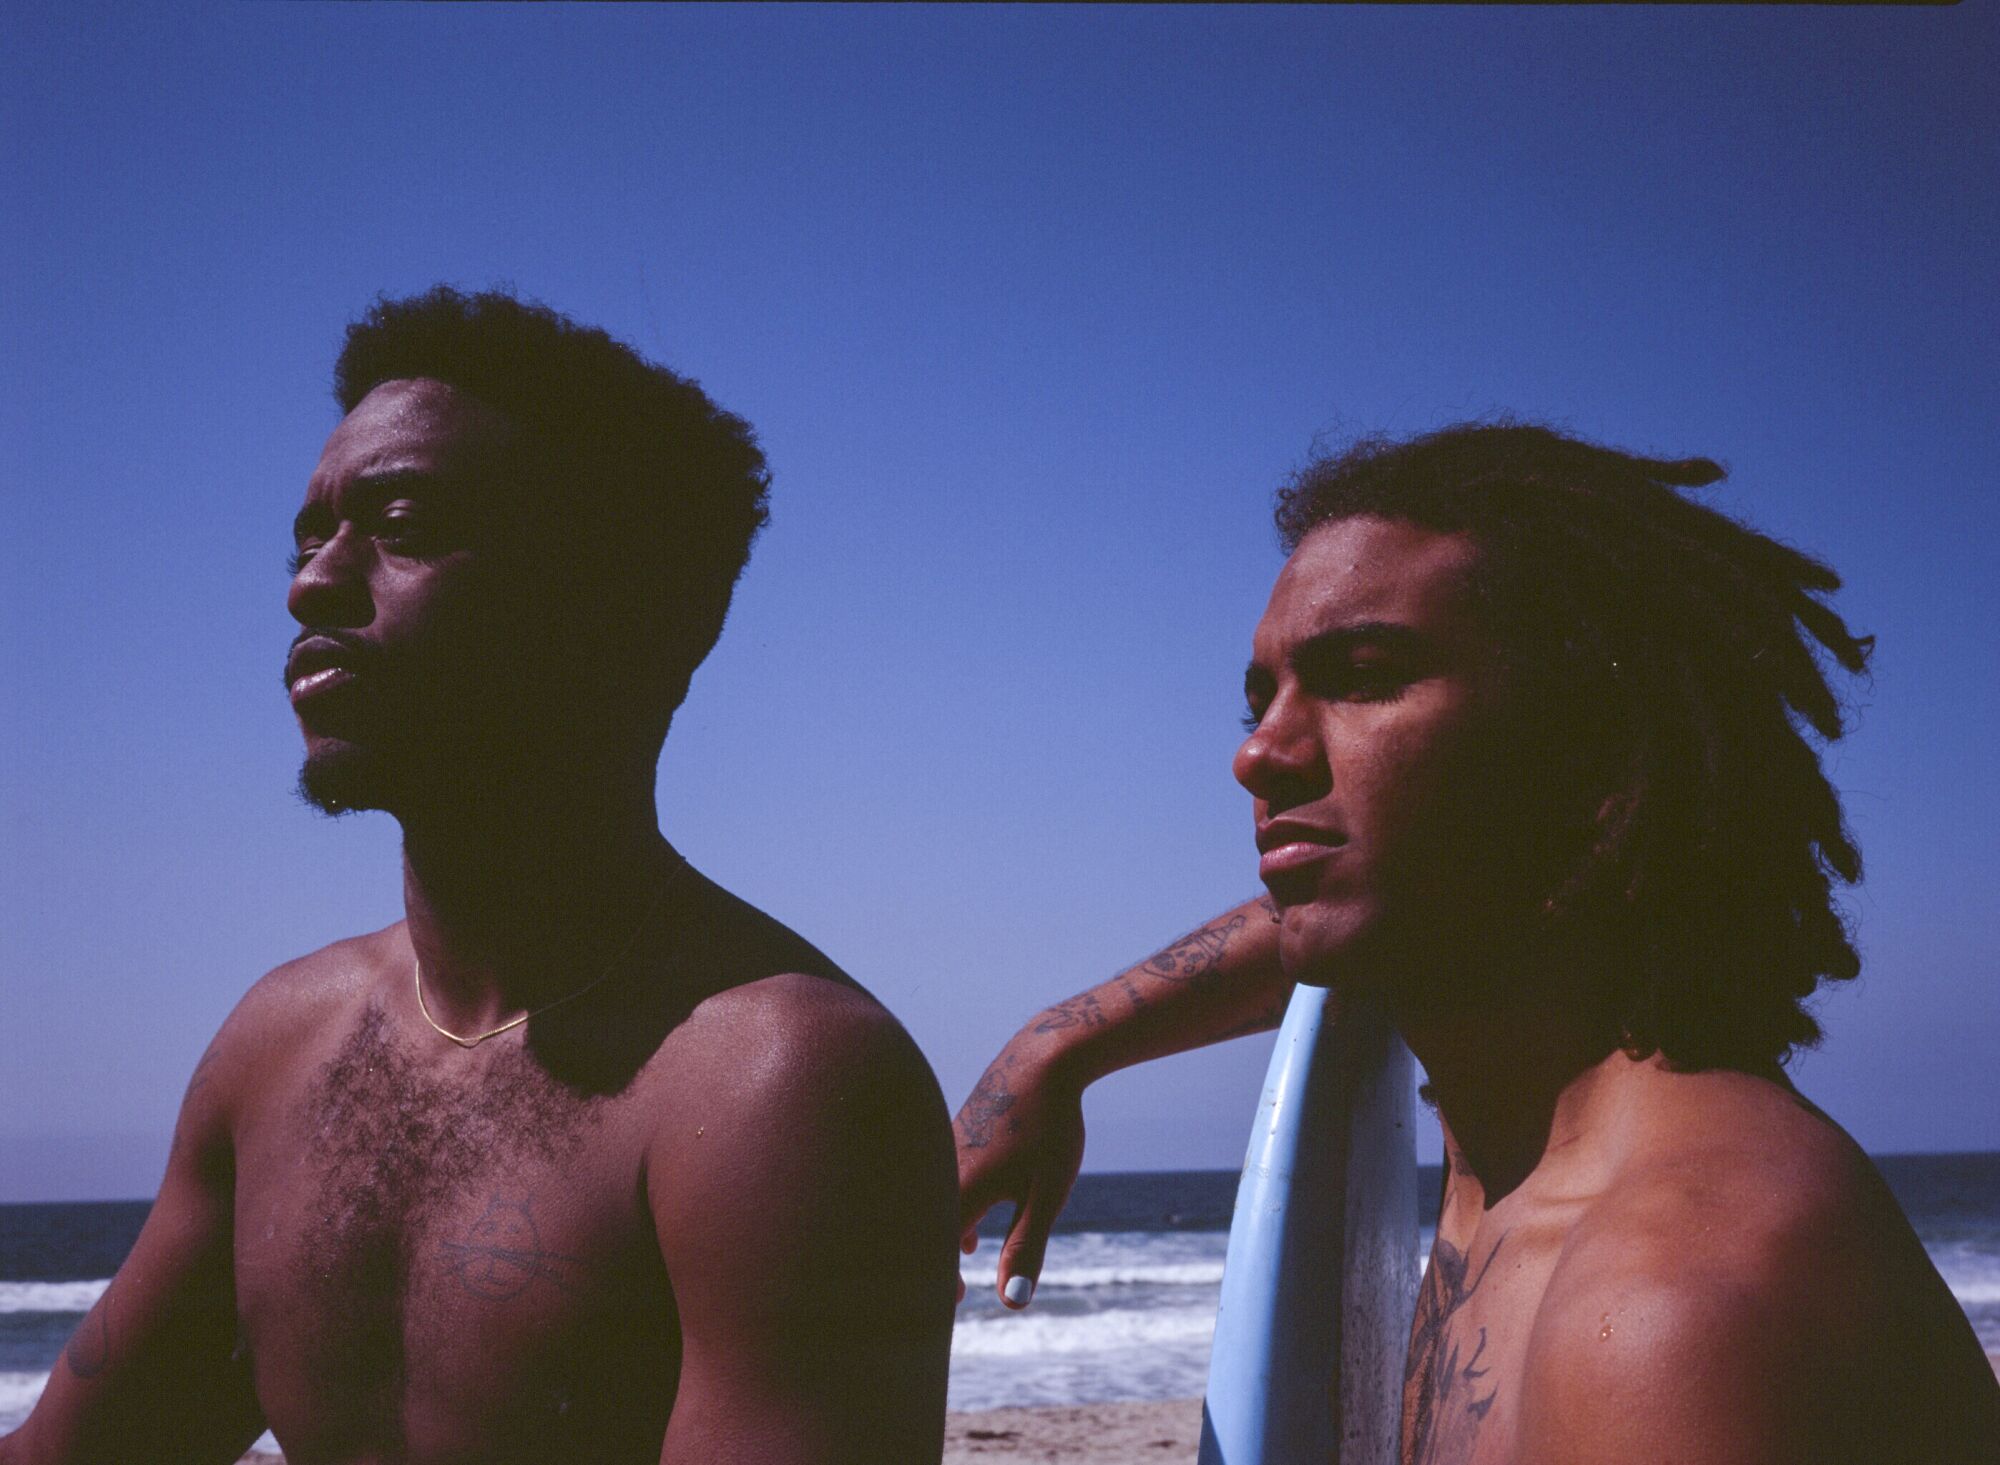 Brick Howze and Gage Crismond pose a portrait after a morning surf session on Saturday, March 13, 2021.